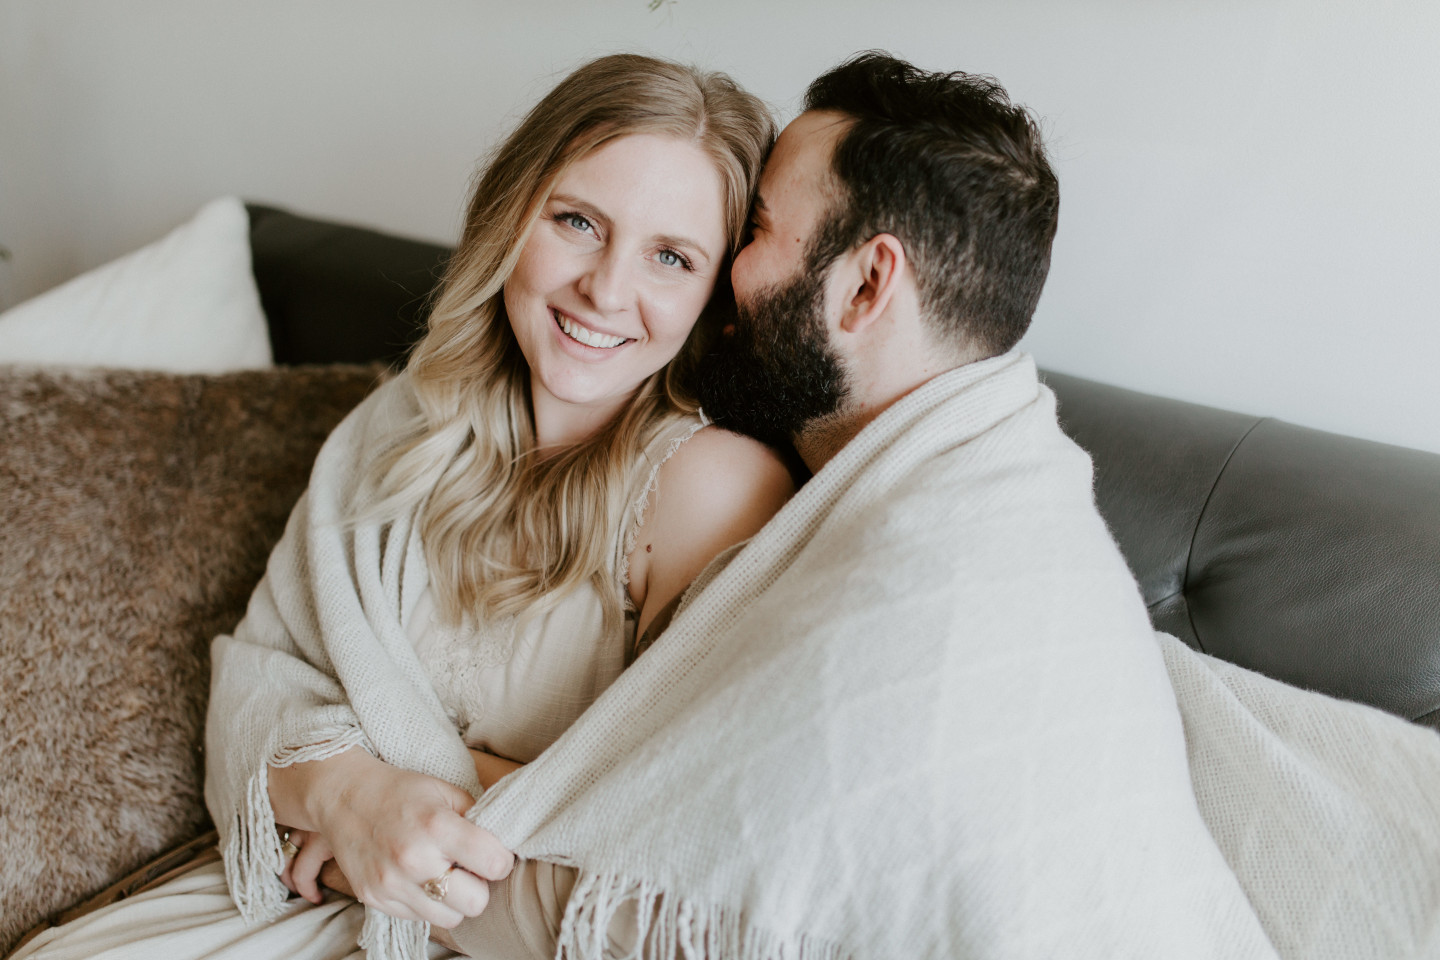 Trevor holds Abigail as they sit on the couch in a Portland, Oregon loft. Lifestyle photography in Portland Oregon by Sienna Plus Josh.